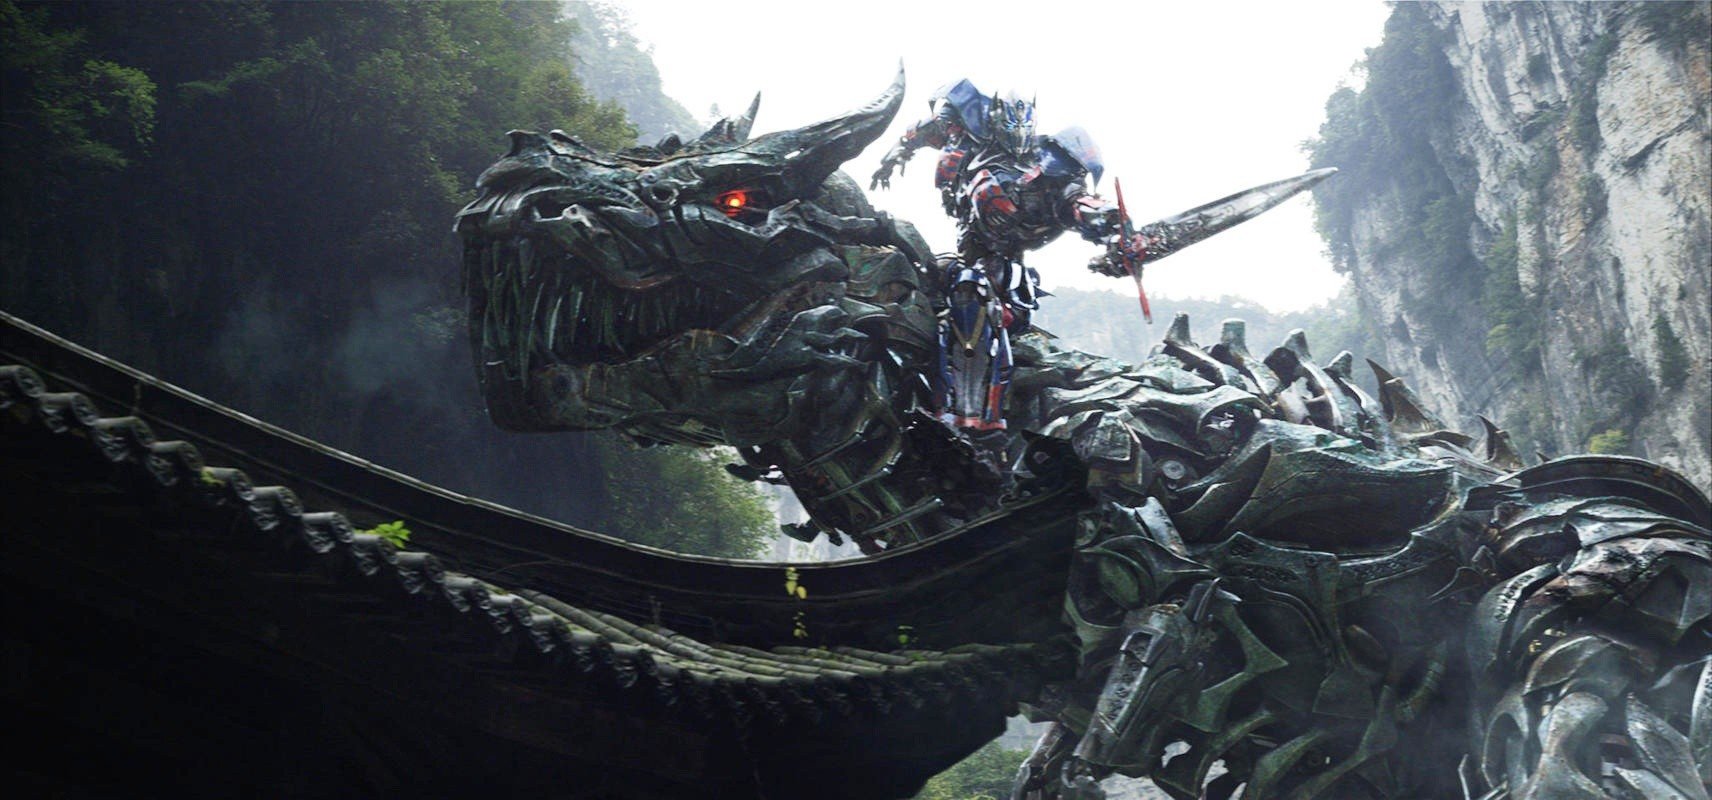 Optimus Prime from Paramount Pictures' Transformers: Age of Extinction (2014)